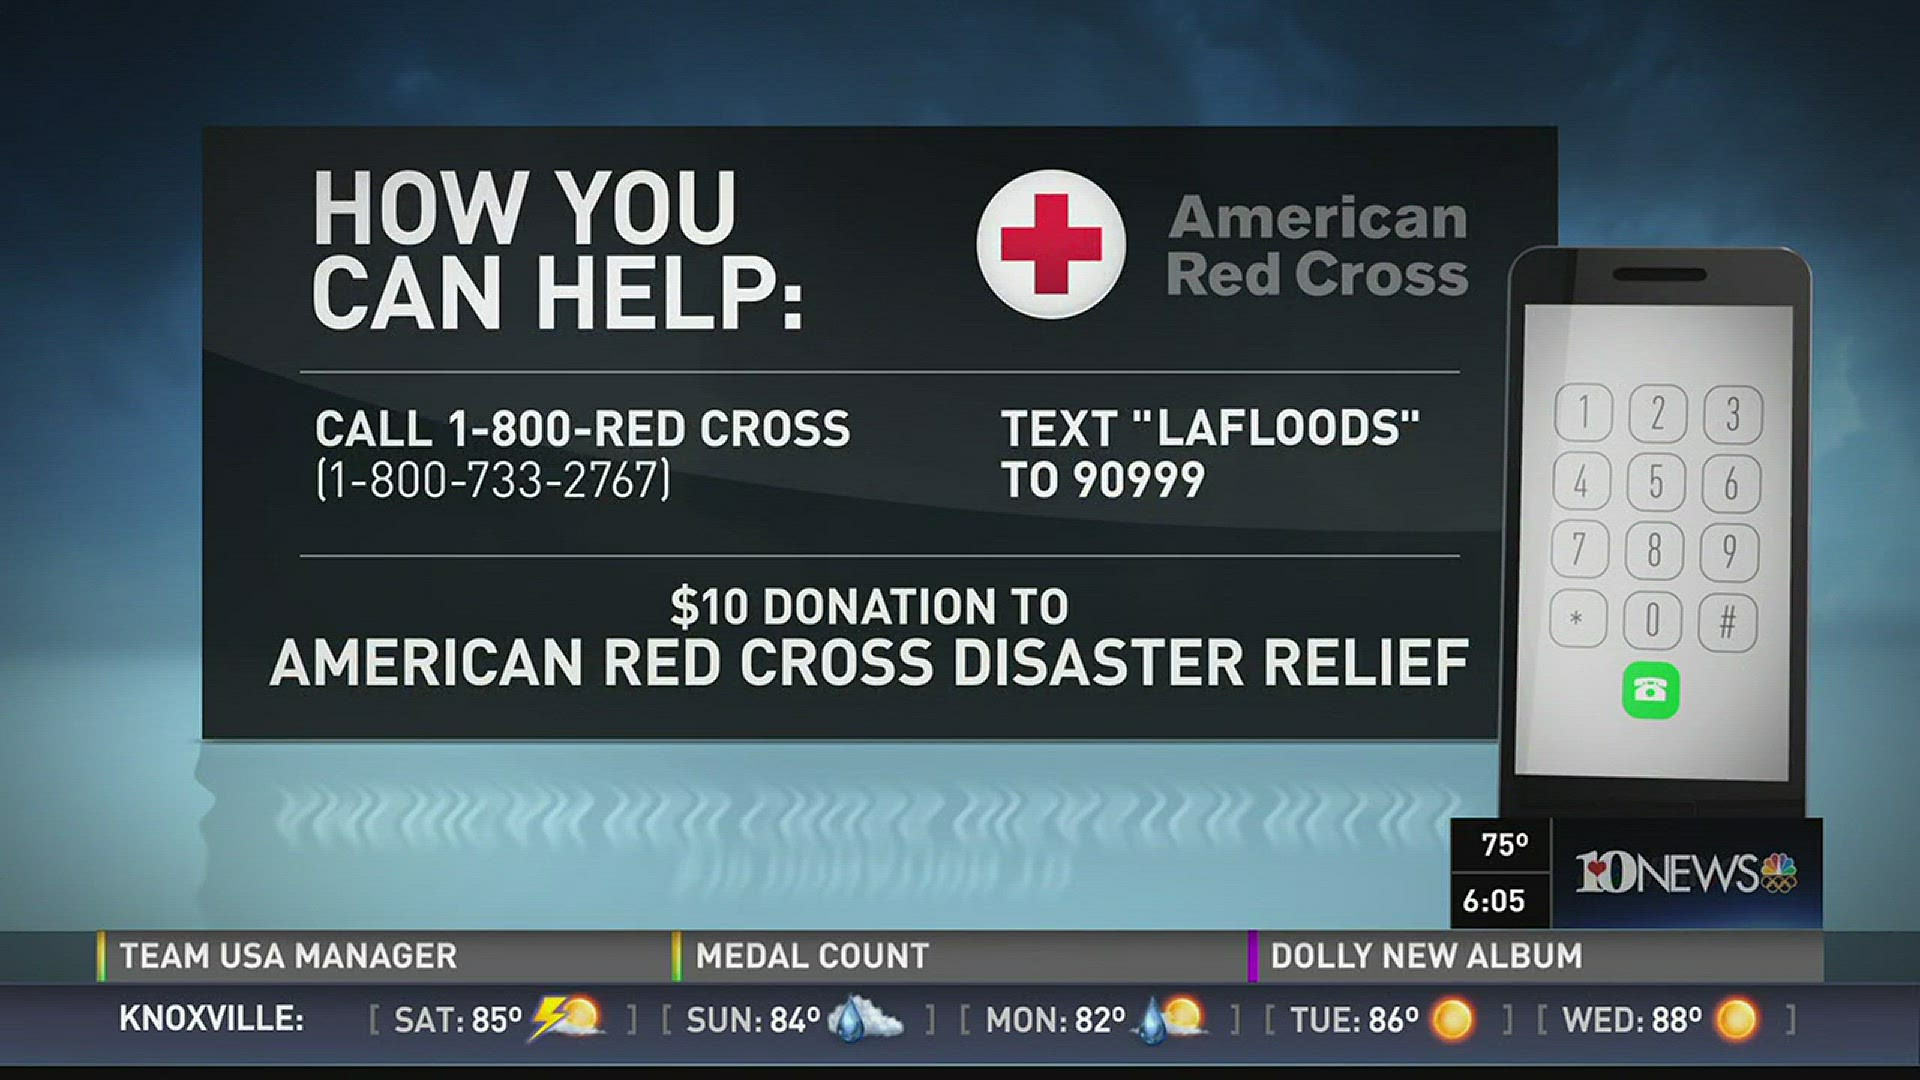 East Tennessee volunteers are opening their hearts and pockets for victims of the flood disaster in Louisiana. Here's how you can help.